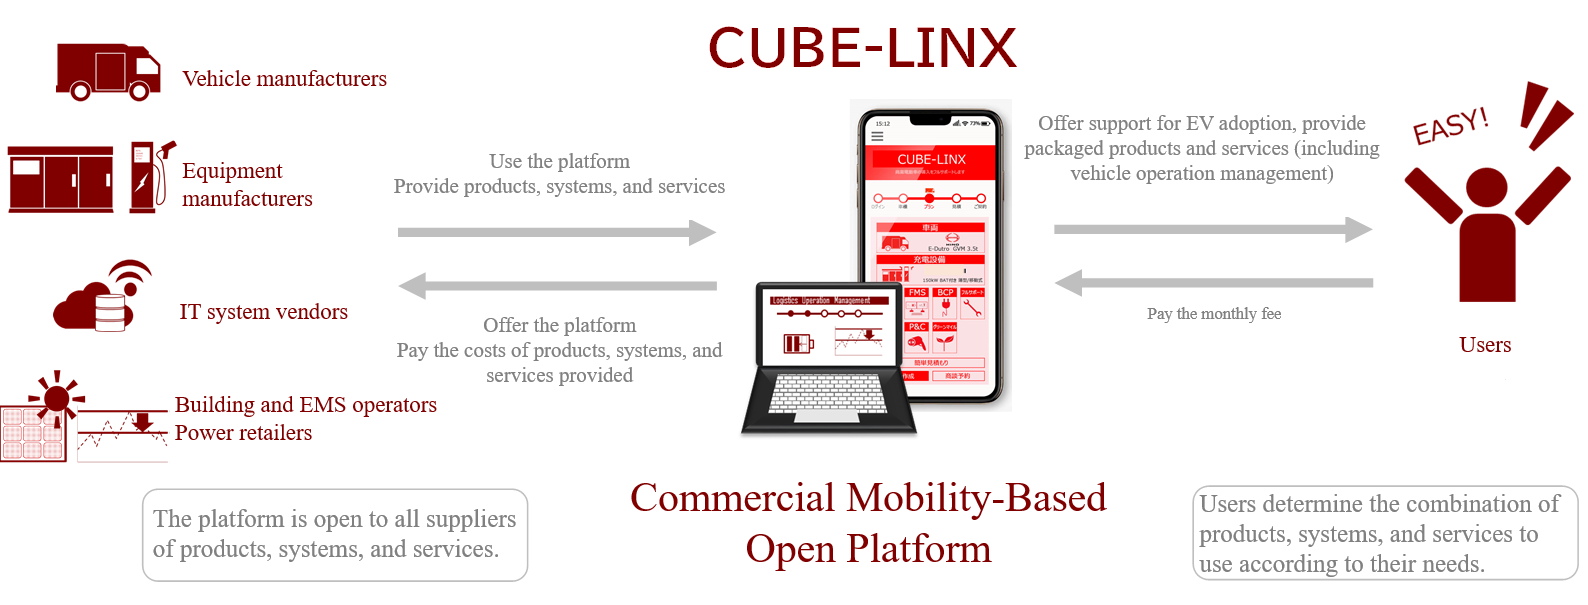 https://www.hino-global.com/corp/news/assets/CUBE-LINX.png